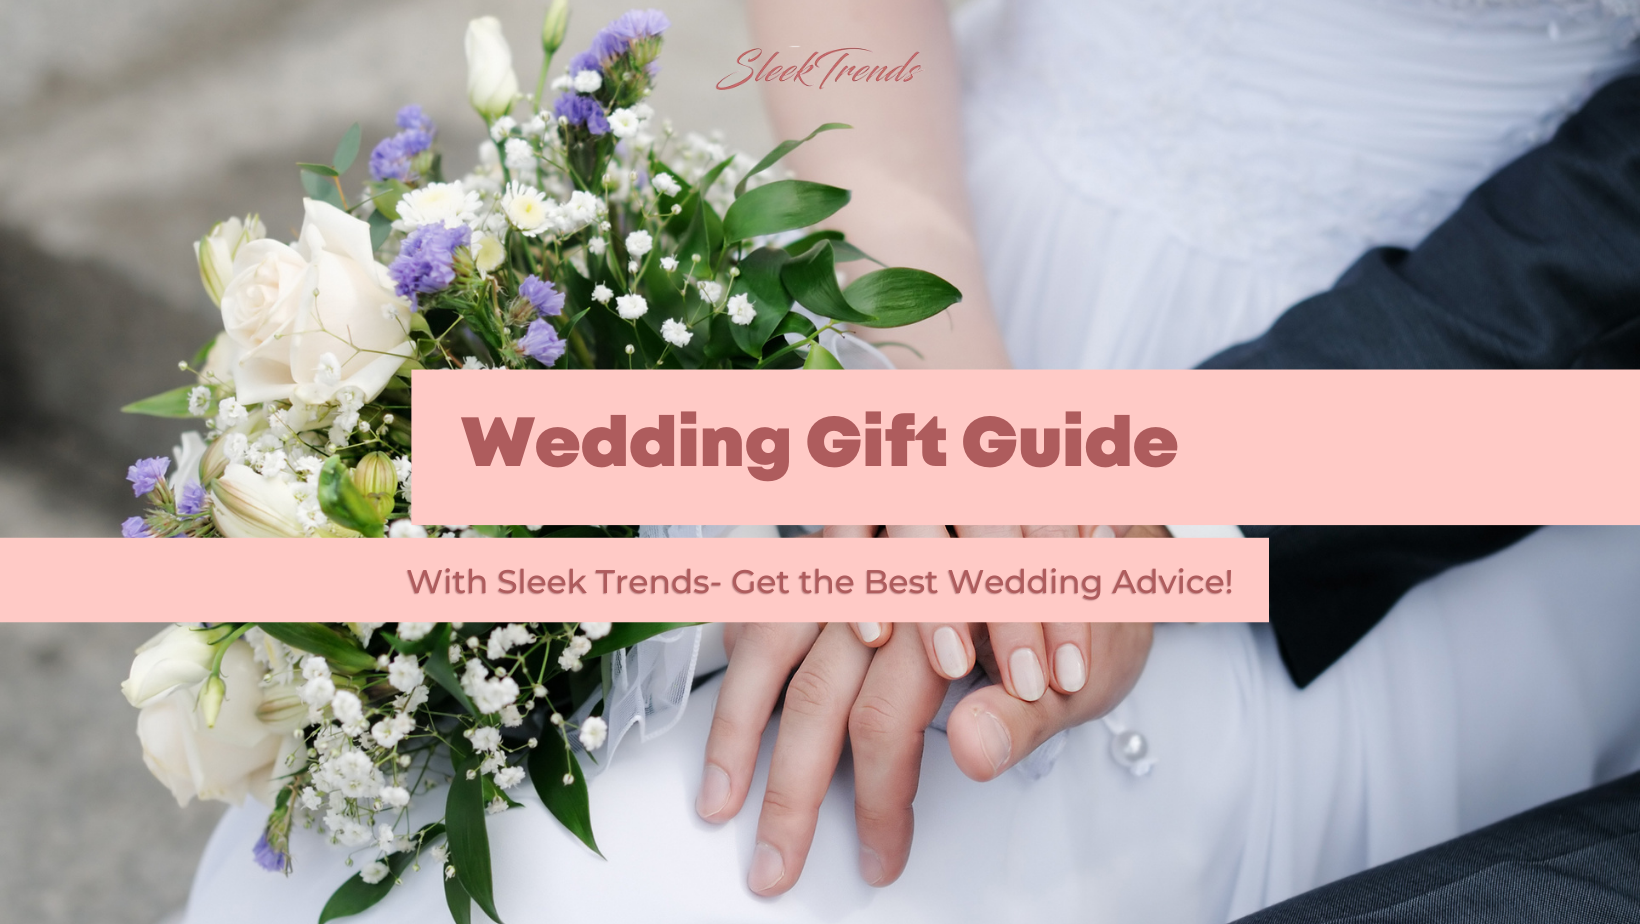 How Much To Spend on a Wedding Gift: Tips, Rules & Real Advice